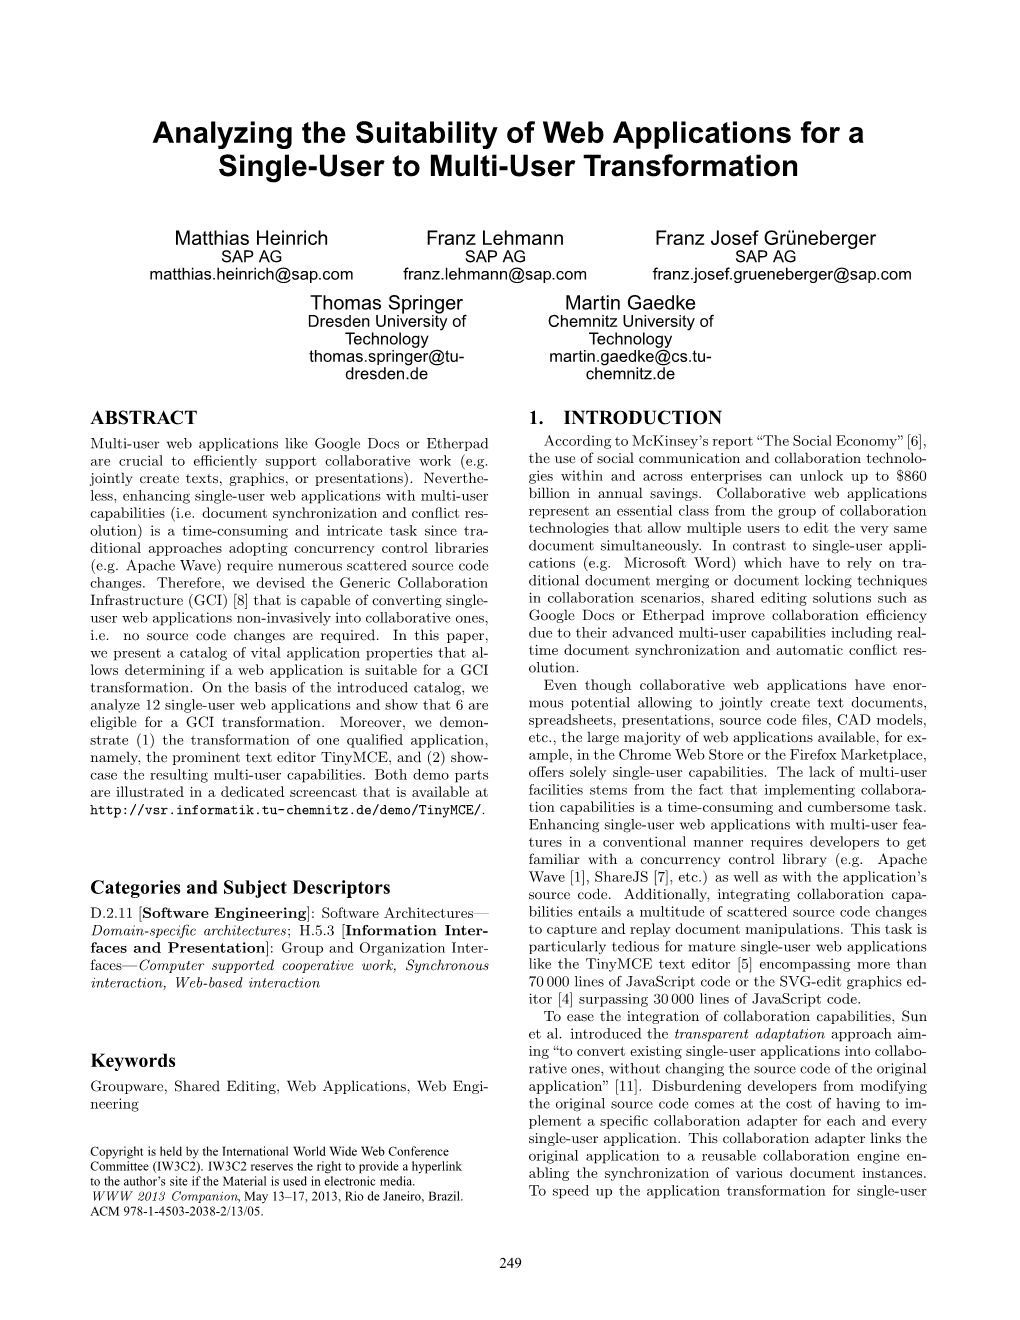 Analyzing the Suitability of Web Applications for a Single-User to Multi-User Transformation